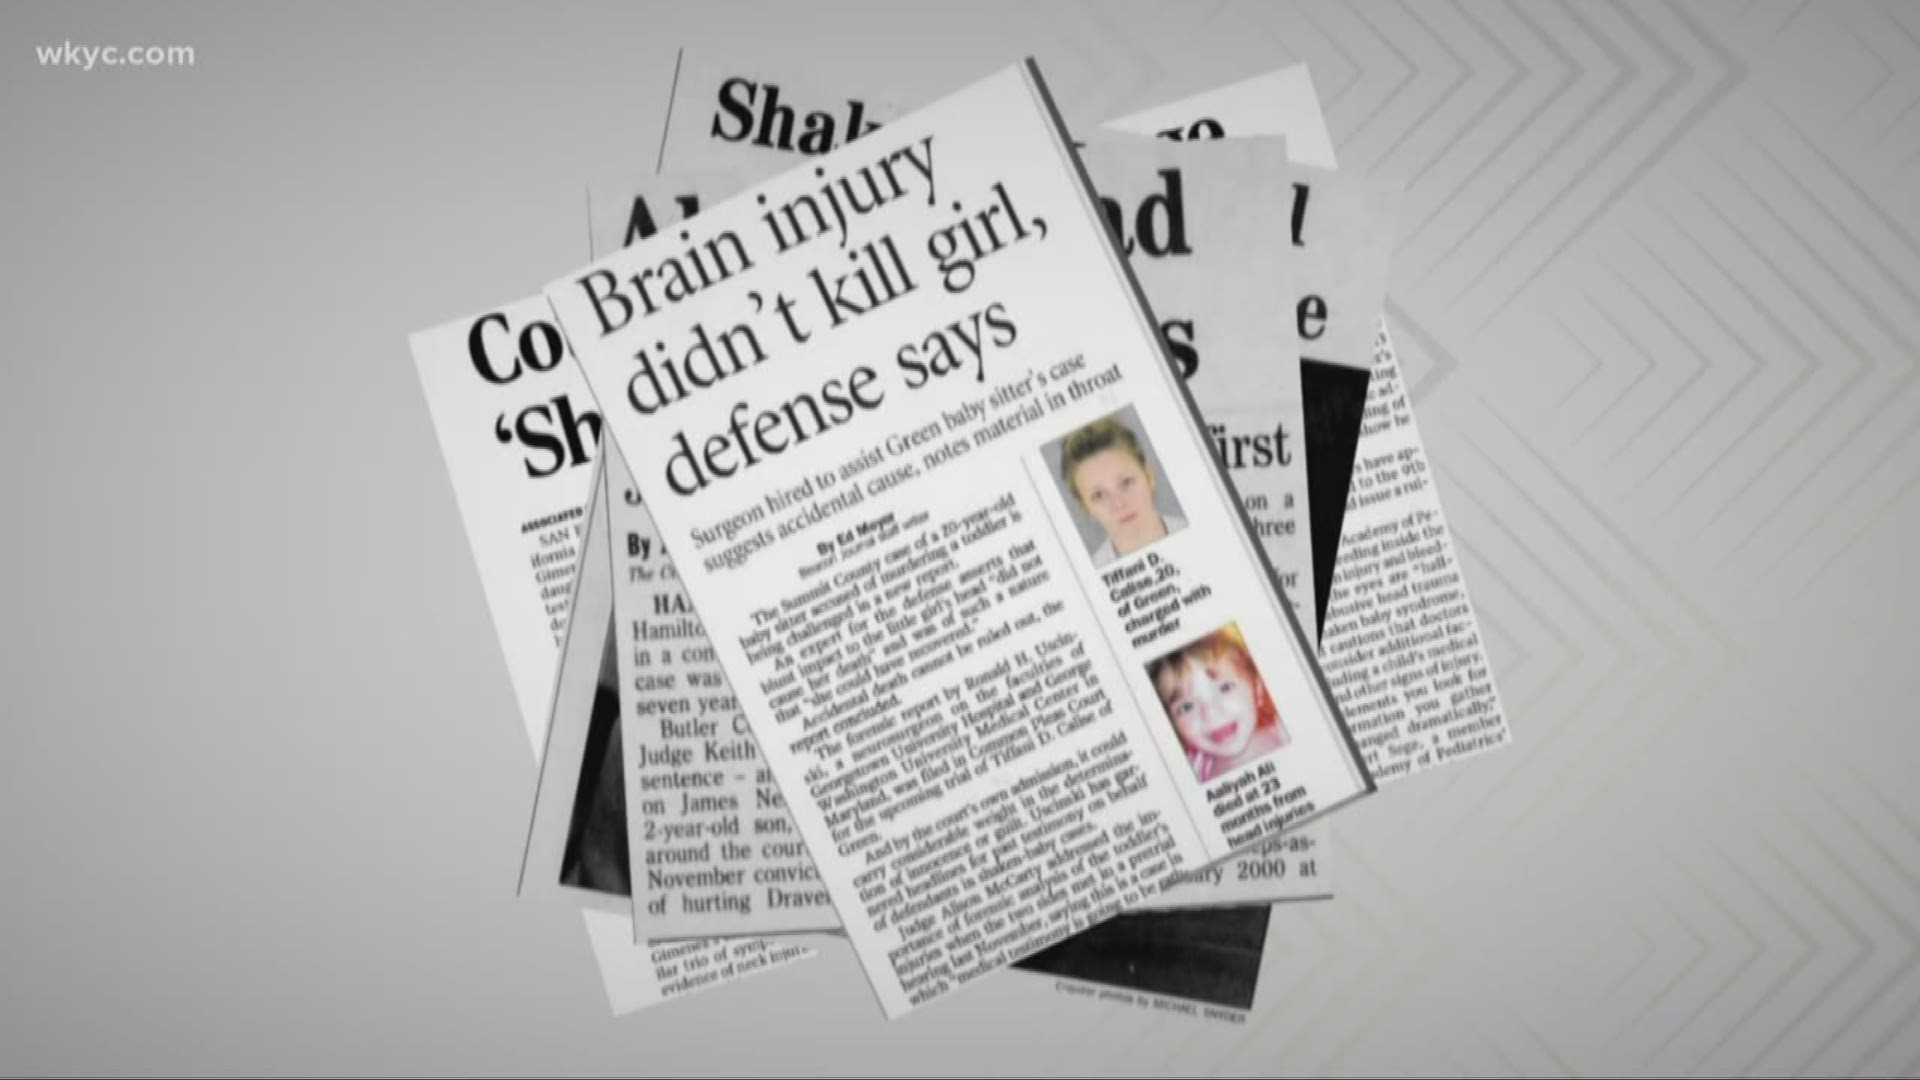 Decades ago, a wave of child abuse allegations hit northeast Ohio involving children diagnosed with 'Shaken Baby Syndrome'. Today, many question those diagnoses.